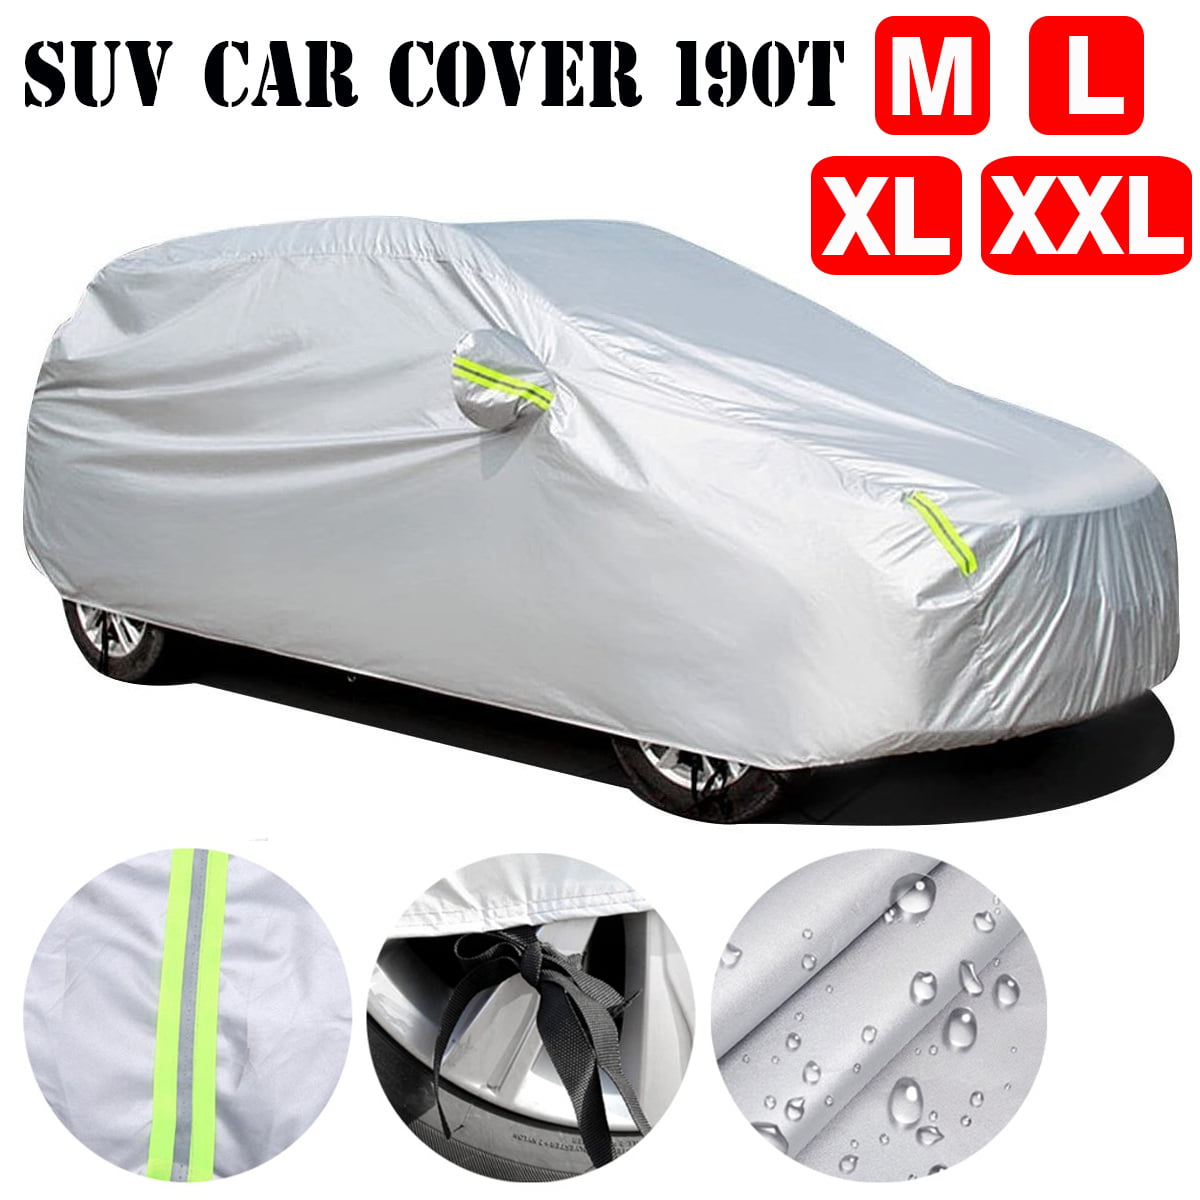 Full Car Cover Waterproof Rain Scratch Protection Dustproof For Toyota Corolla 